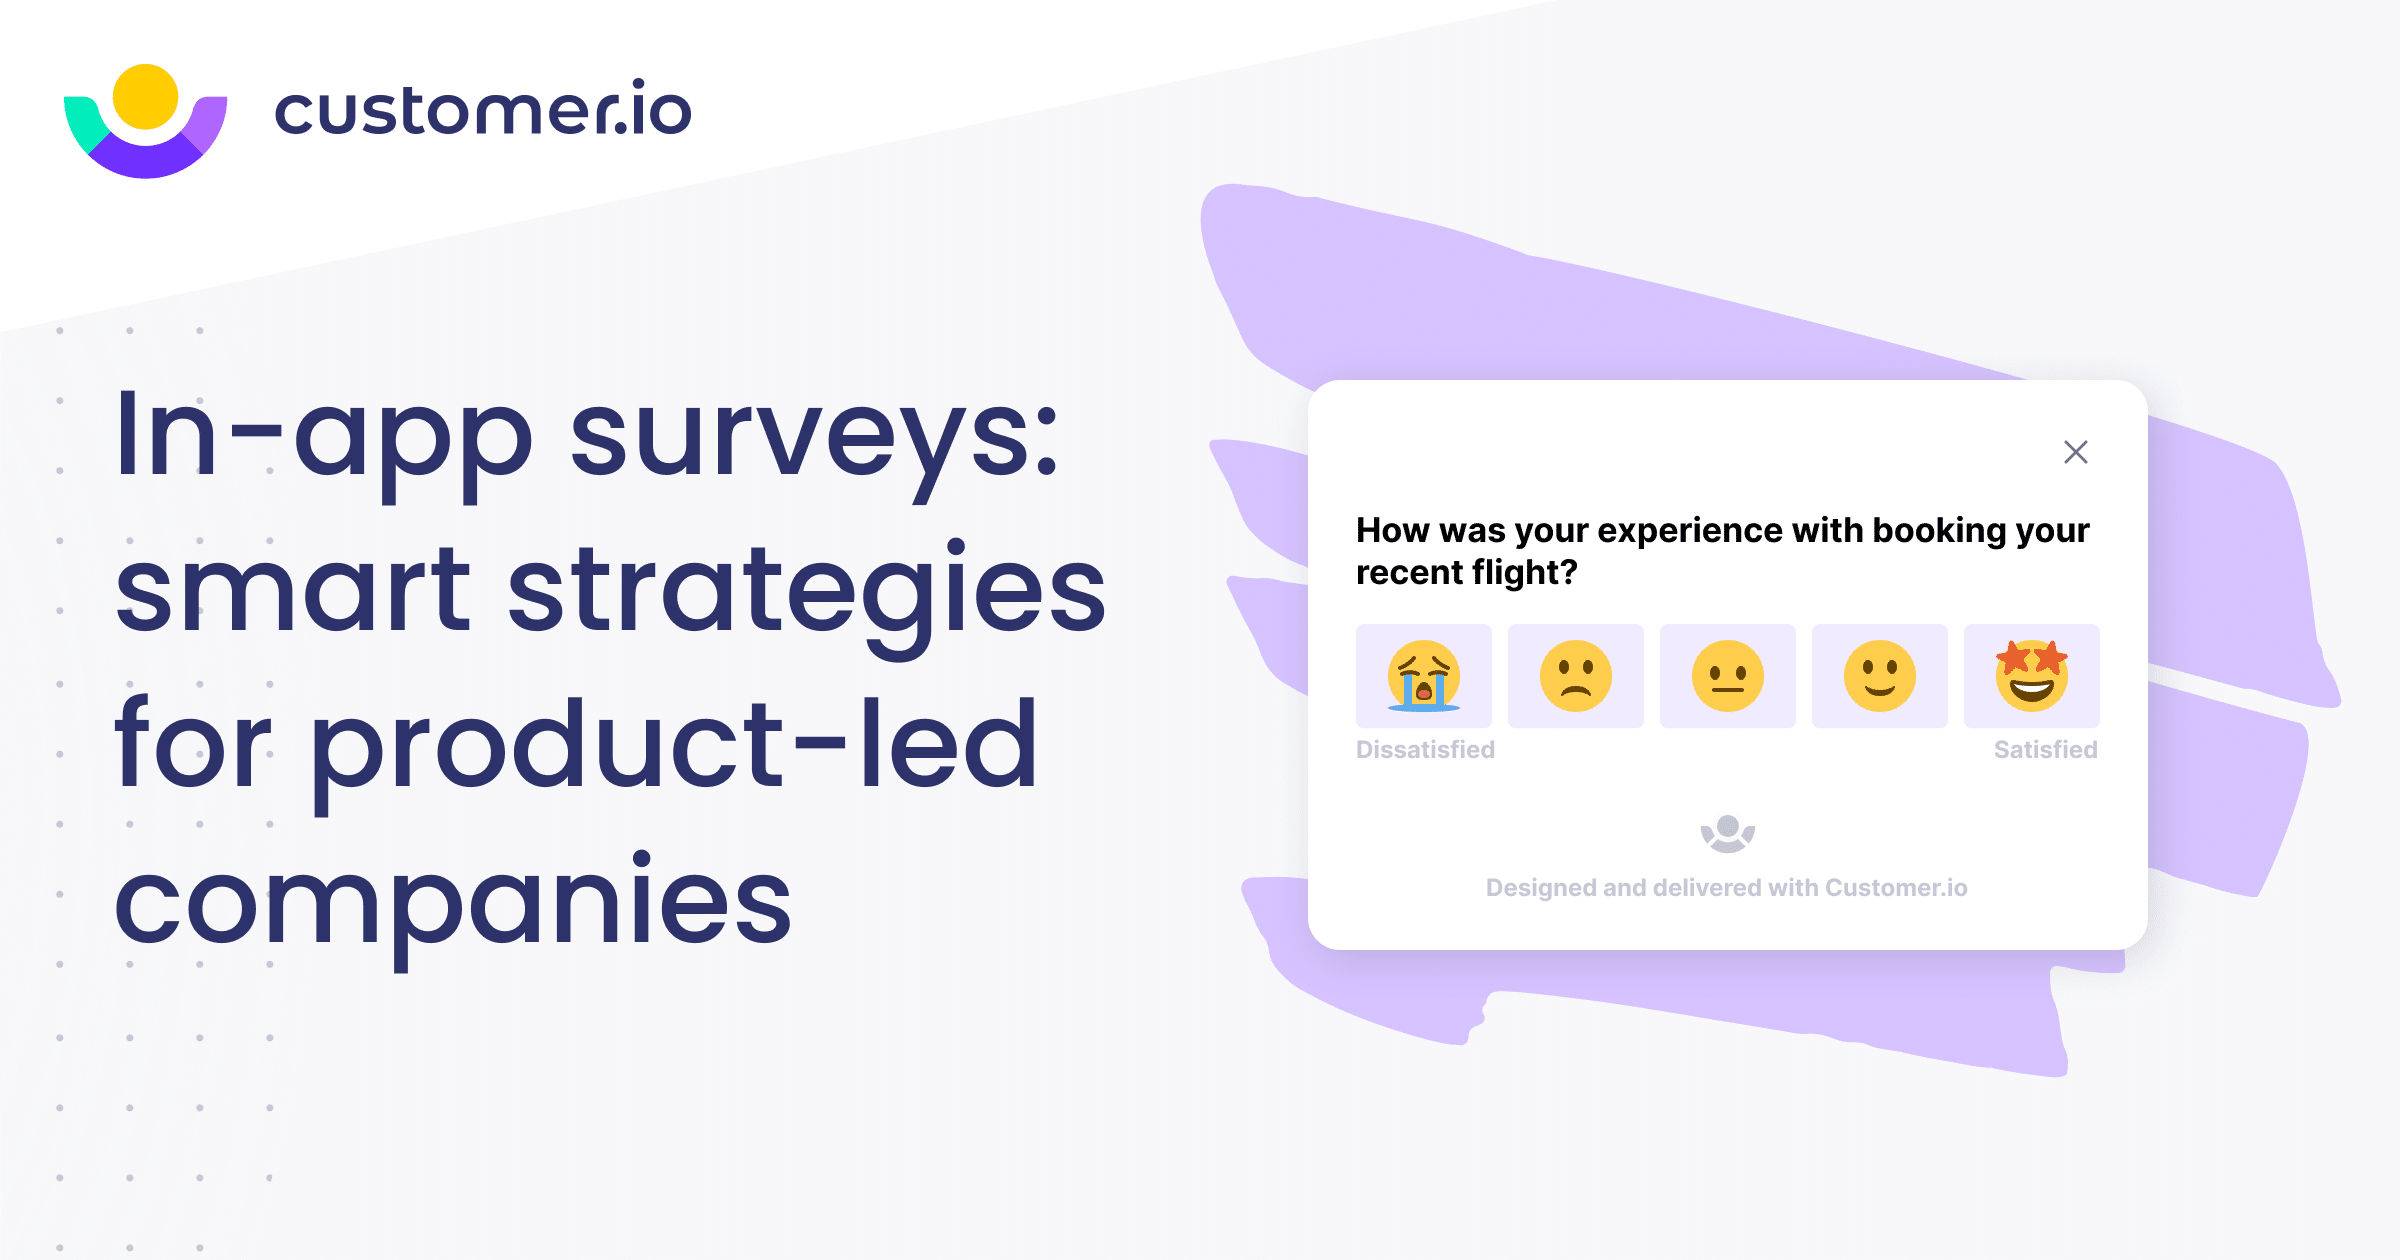 In-app surveys: smart strategies for product-led companies